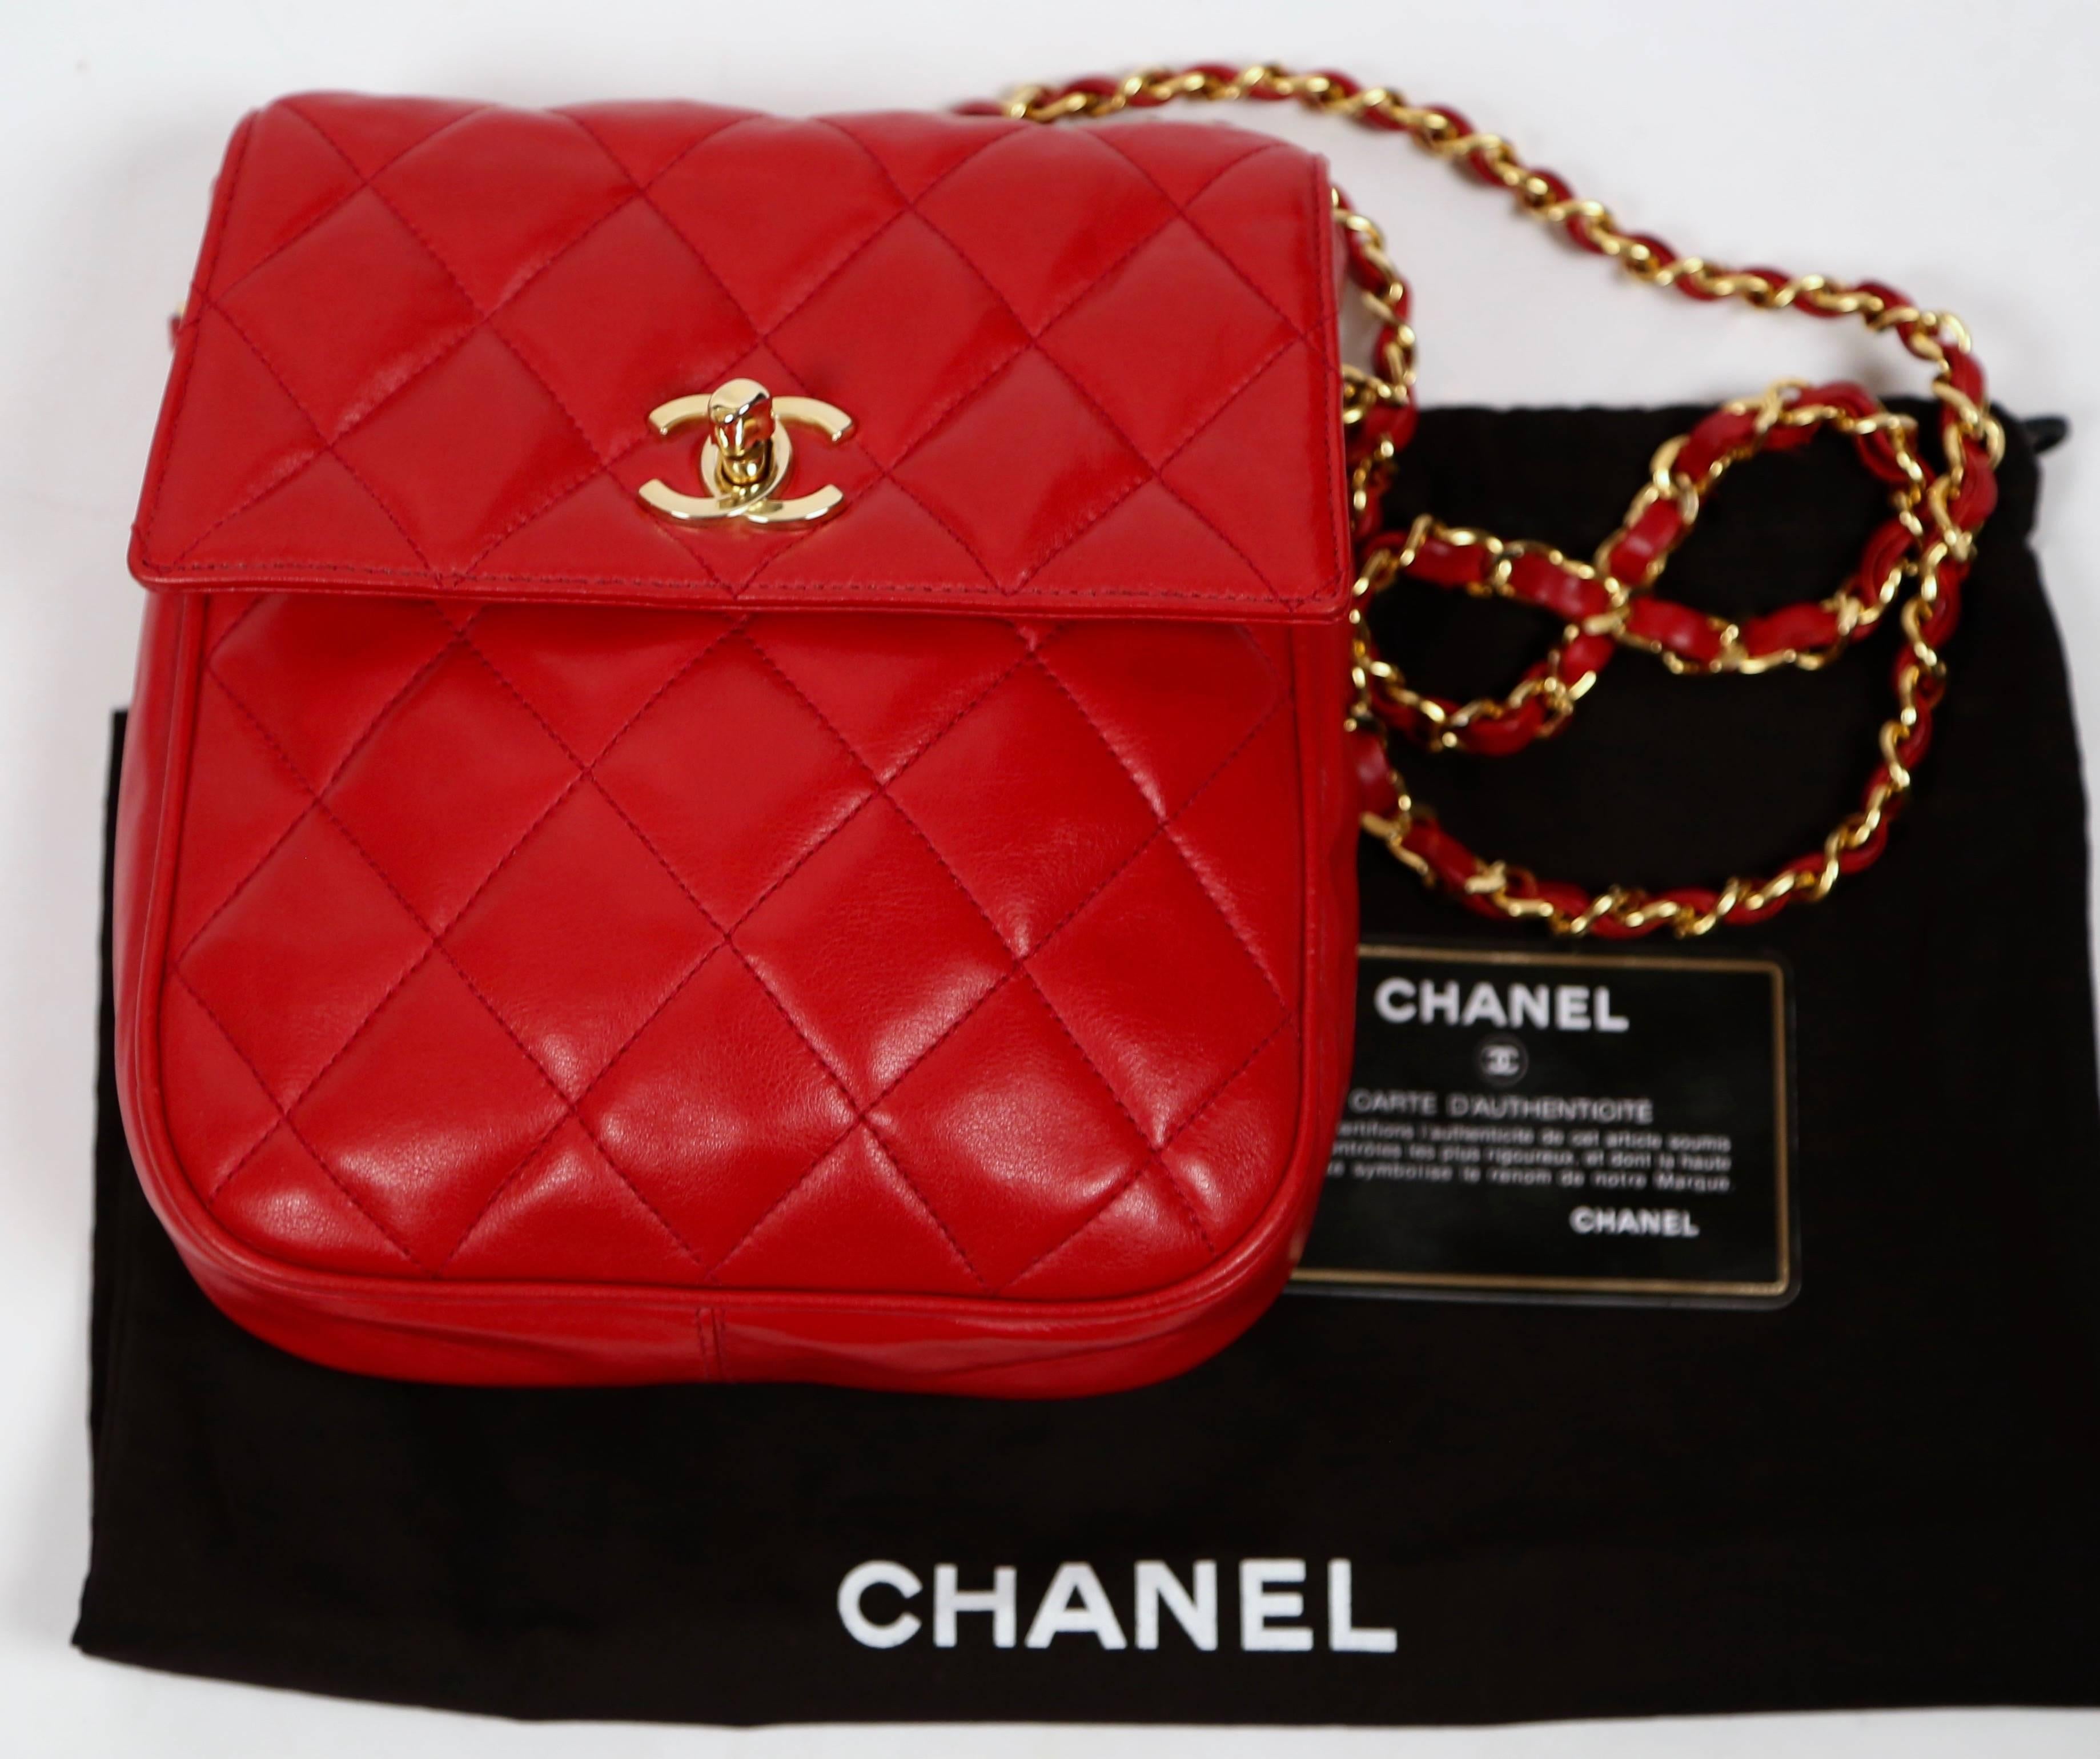 Women's or Men's 1980's CHANEL red quilted leather satchel bag with gold CC turnlock